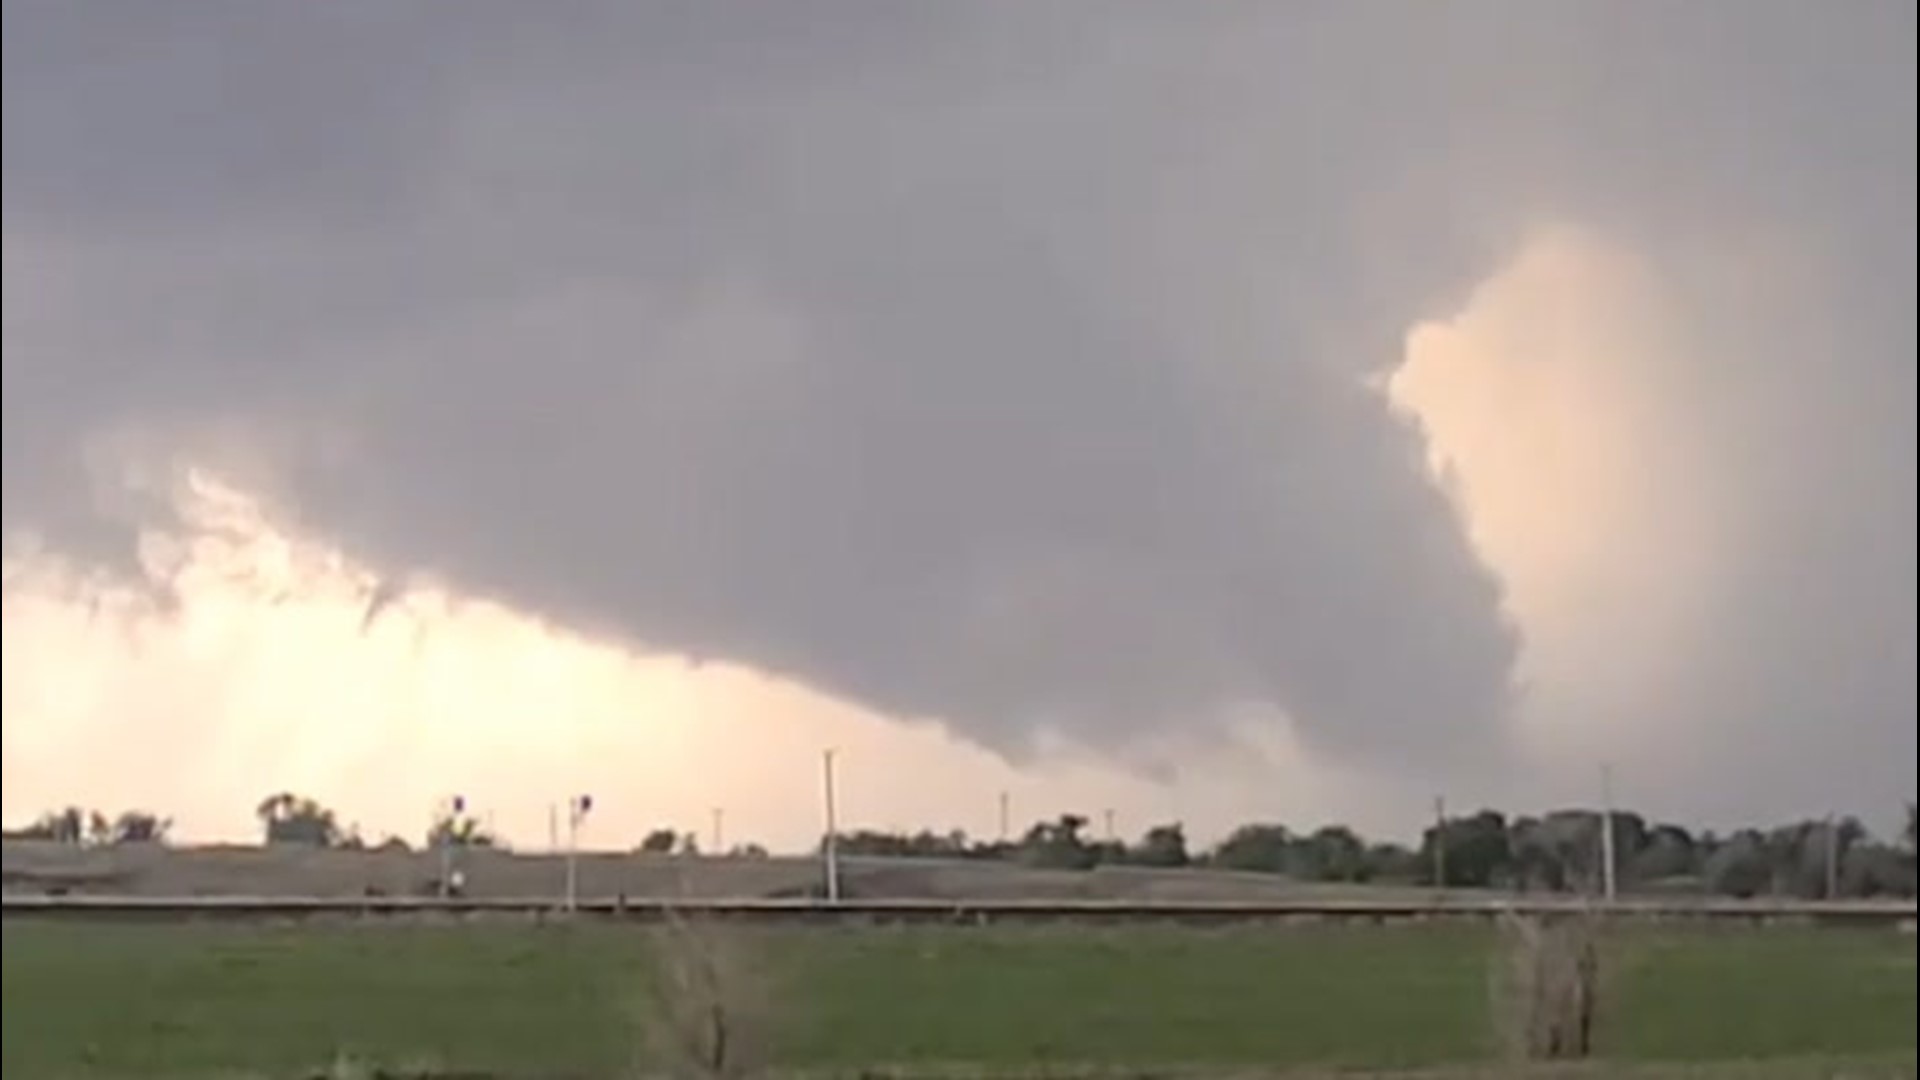 This possible tornado forming over Holly, Colorado, triggered tornado sirens to sound. There were multiple reports of tornadoes in the area on May 21.